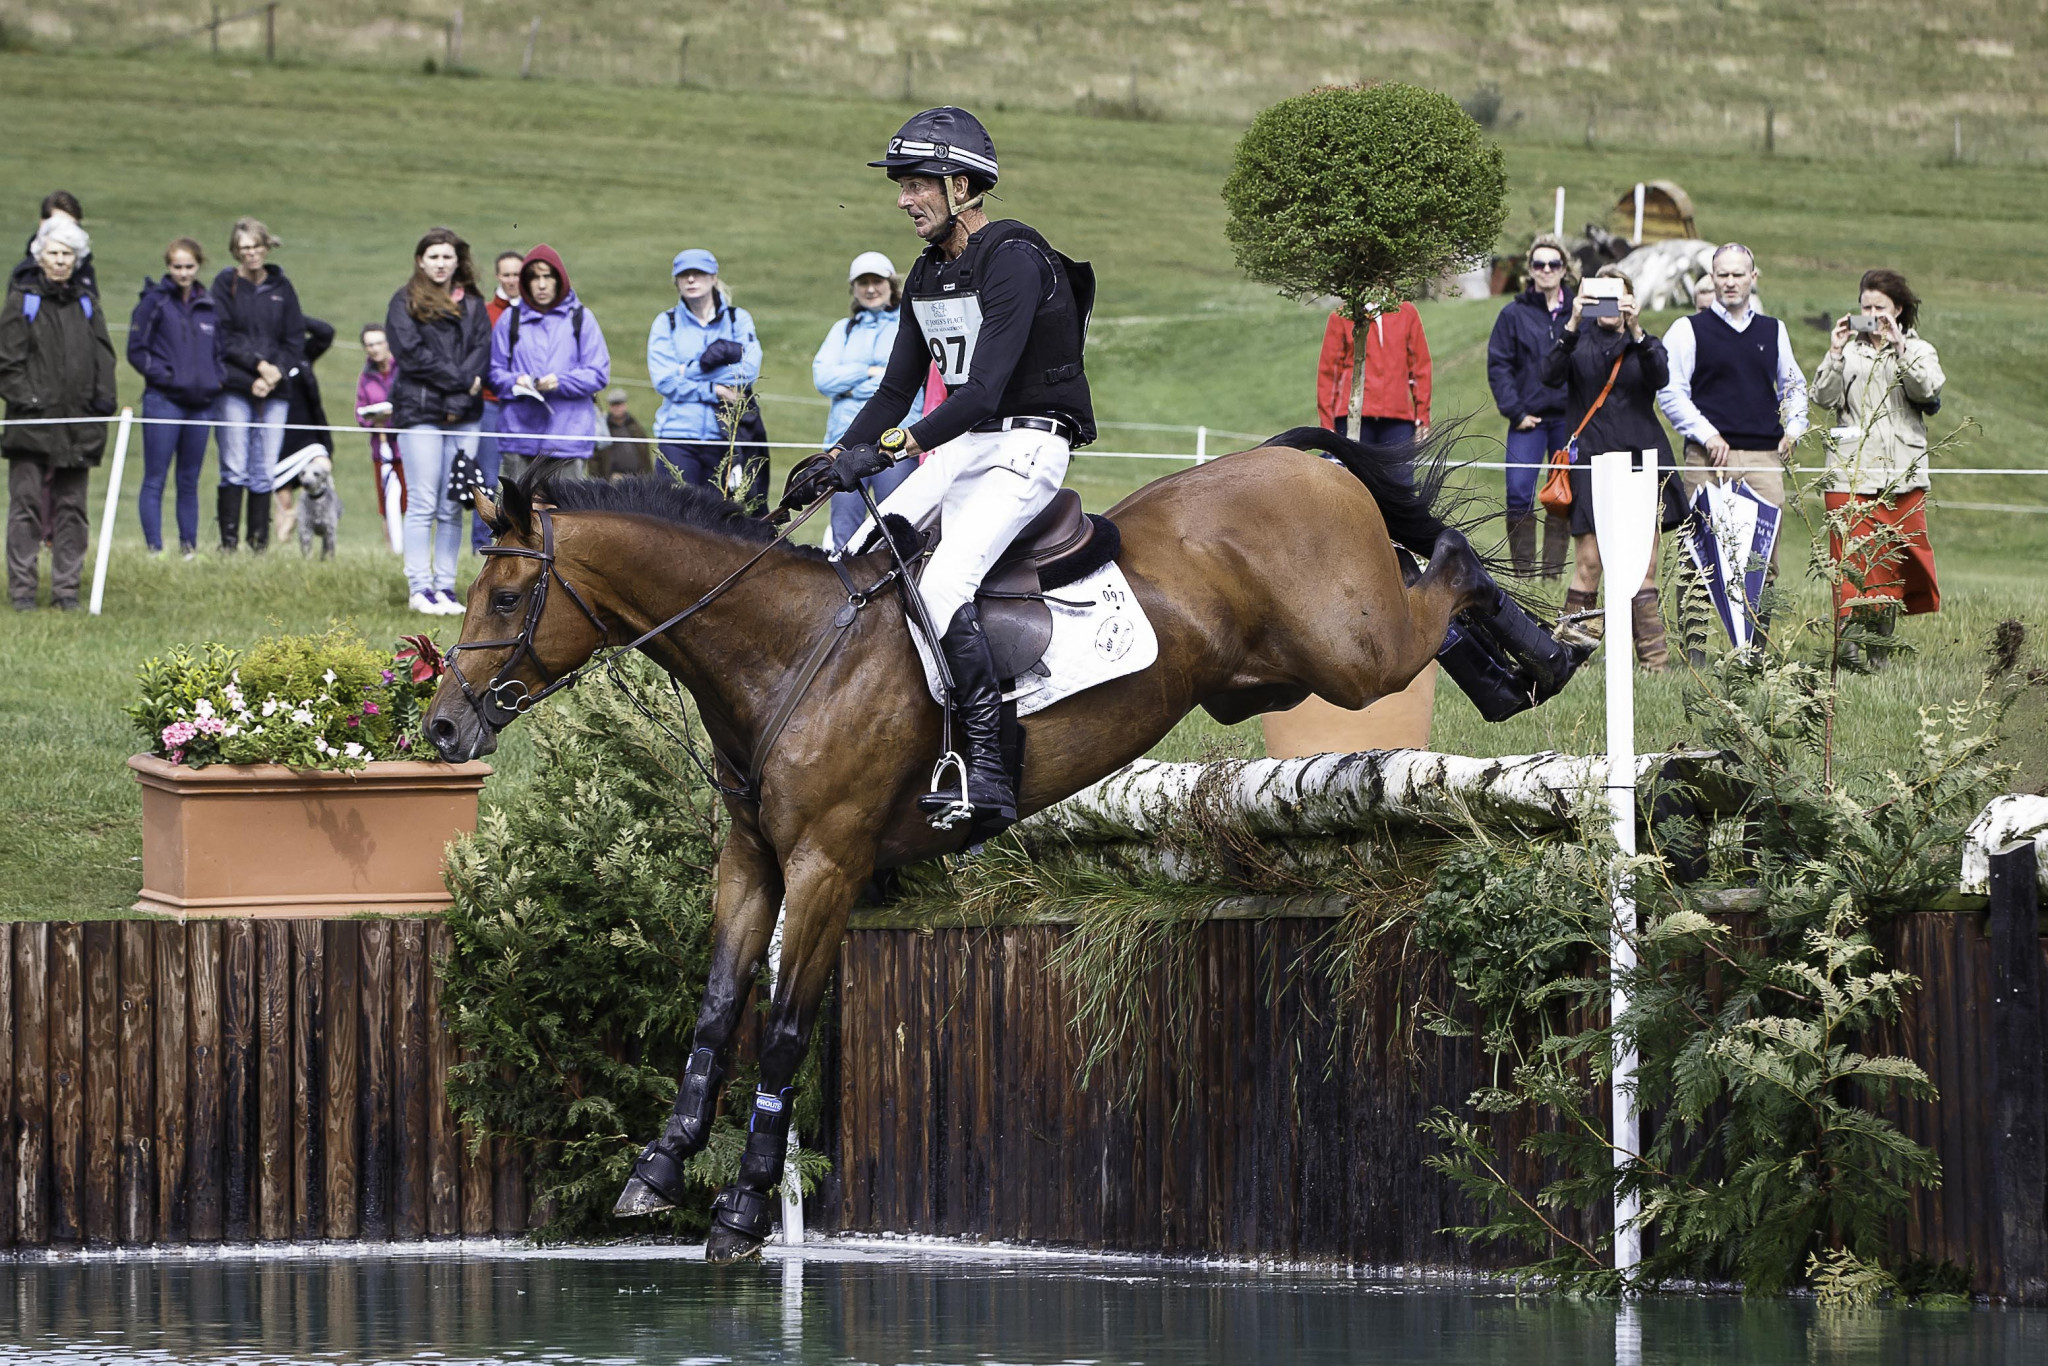 New Zealand move into lead after cross country at FEI Eventing Nations Cup in Cappoquin